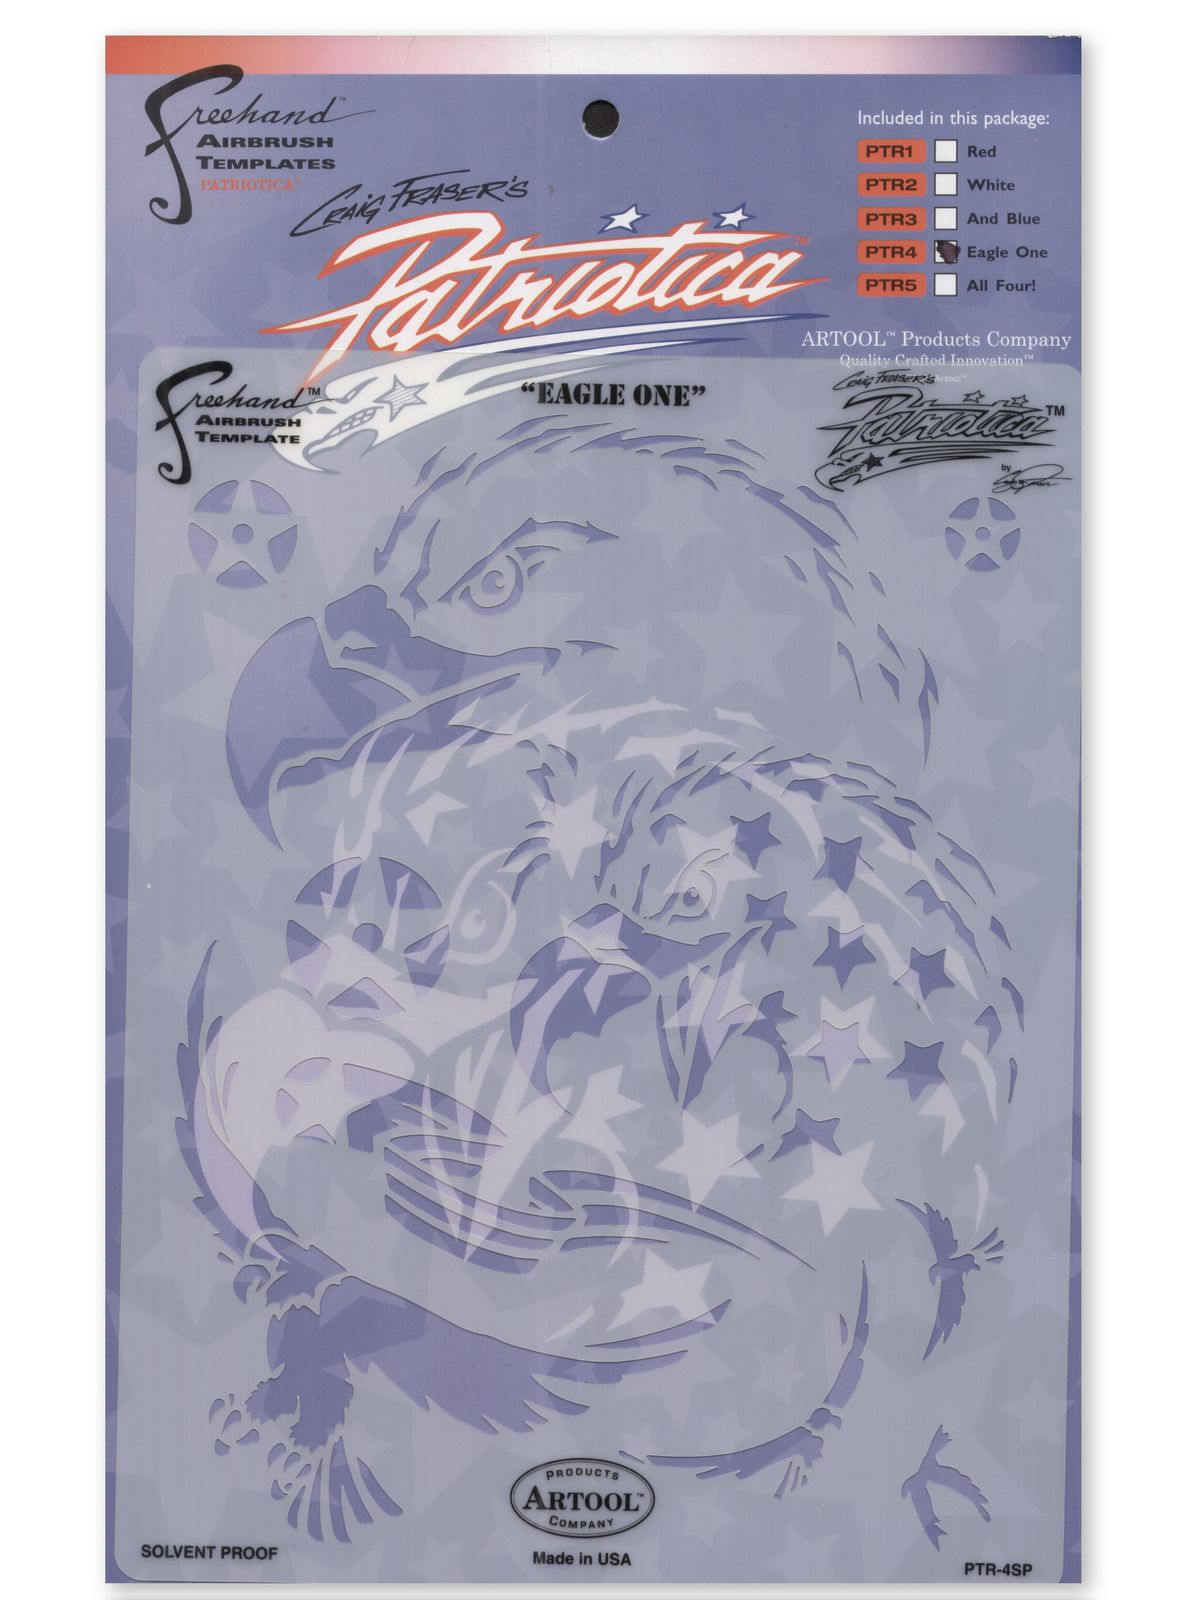 Patriotica Eagle One Freehand Airbrush Template By Craig Fraser Template